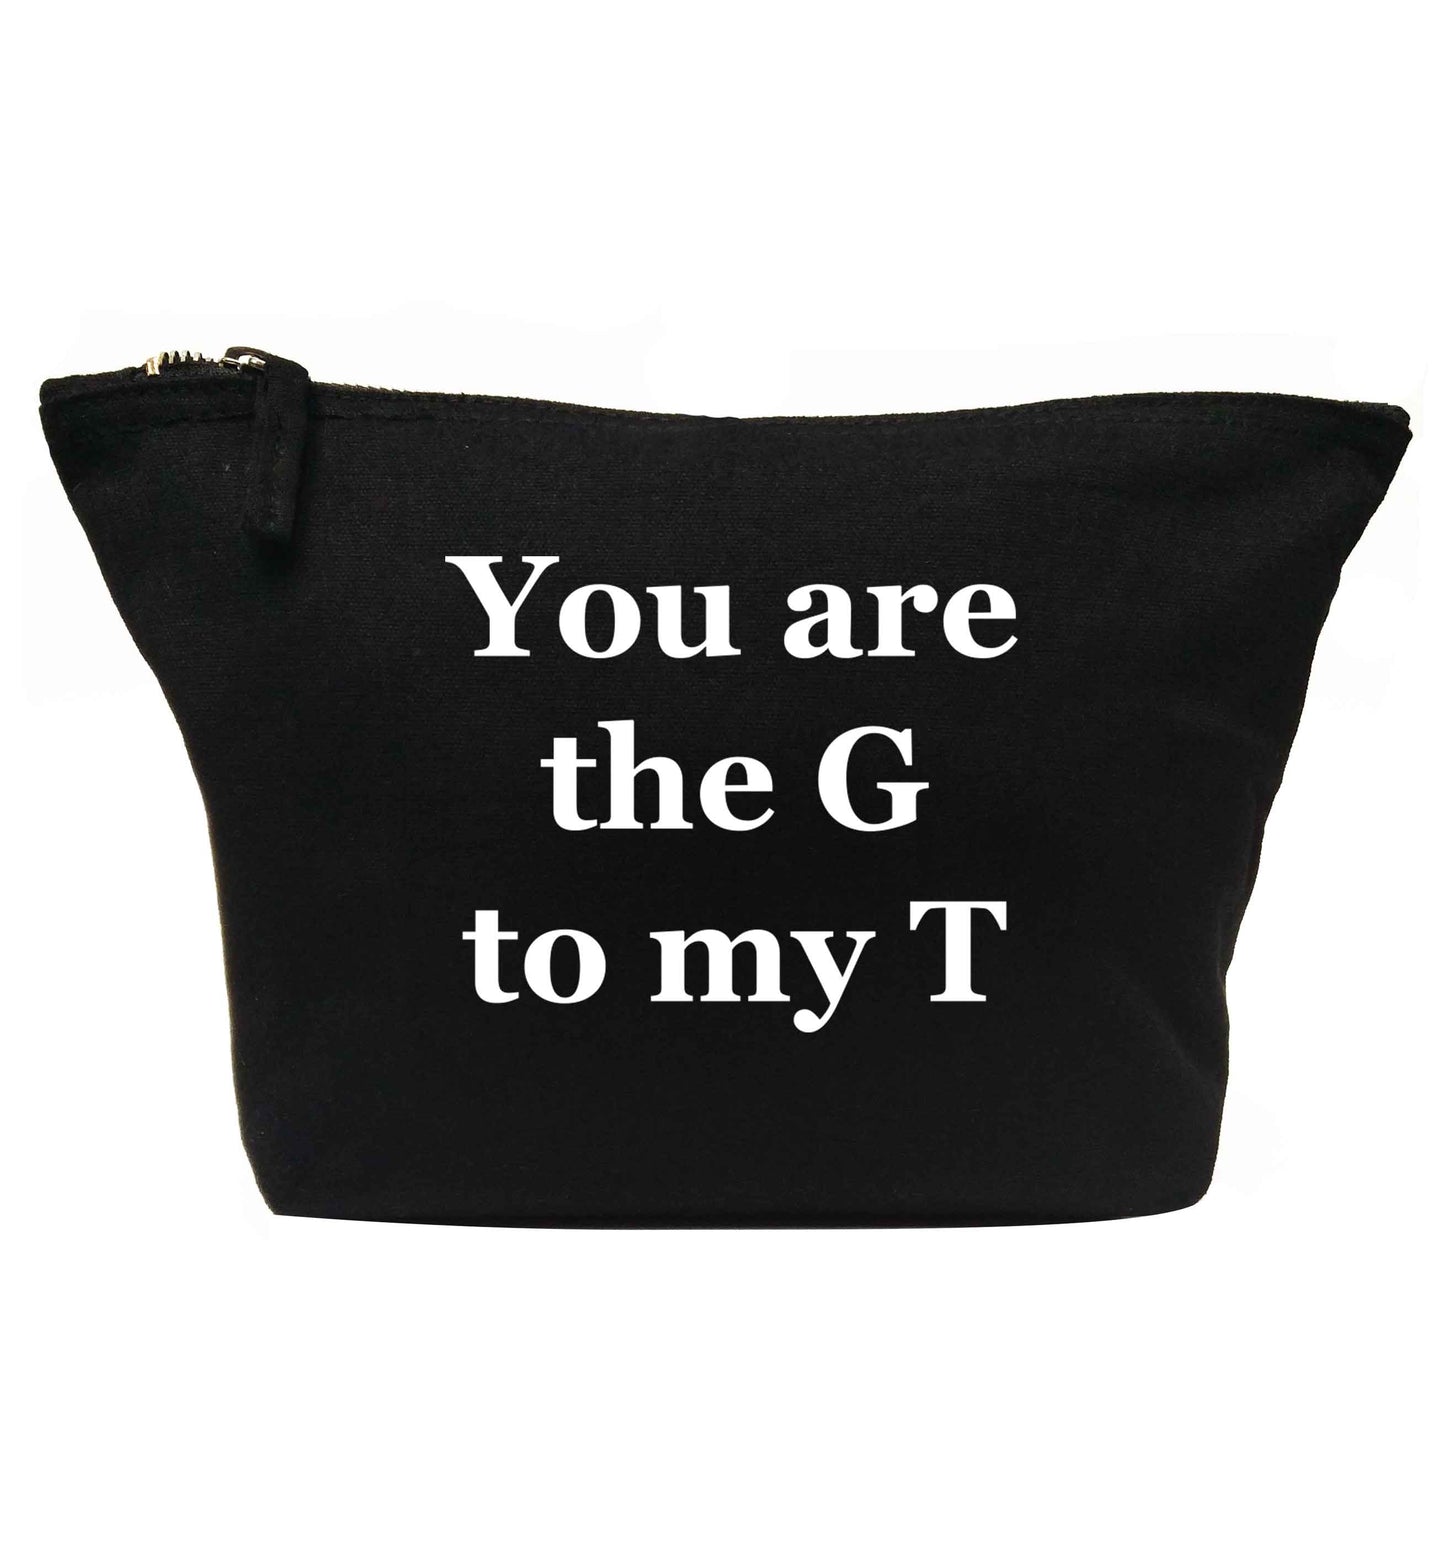 You are the G to my T | makeup / wash bag